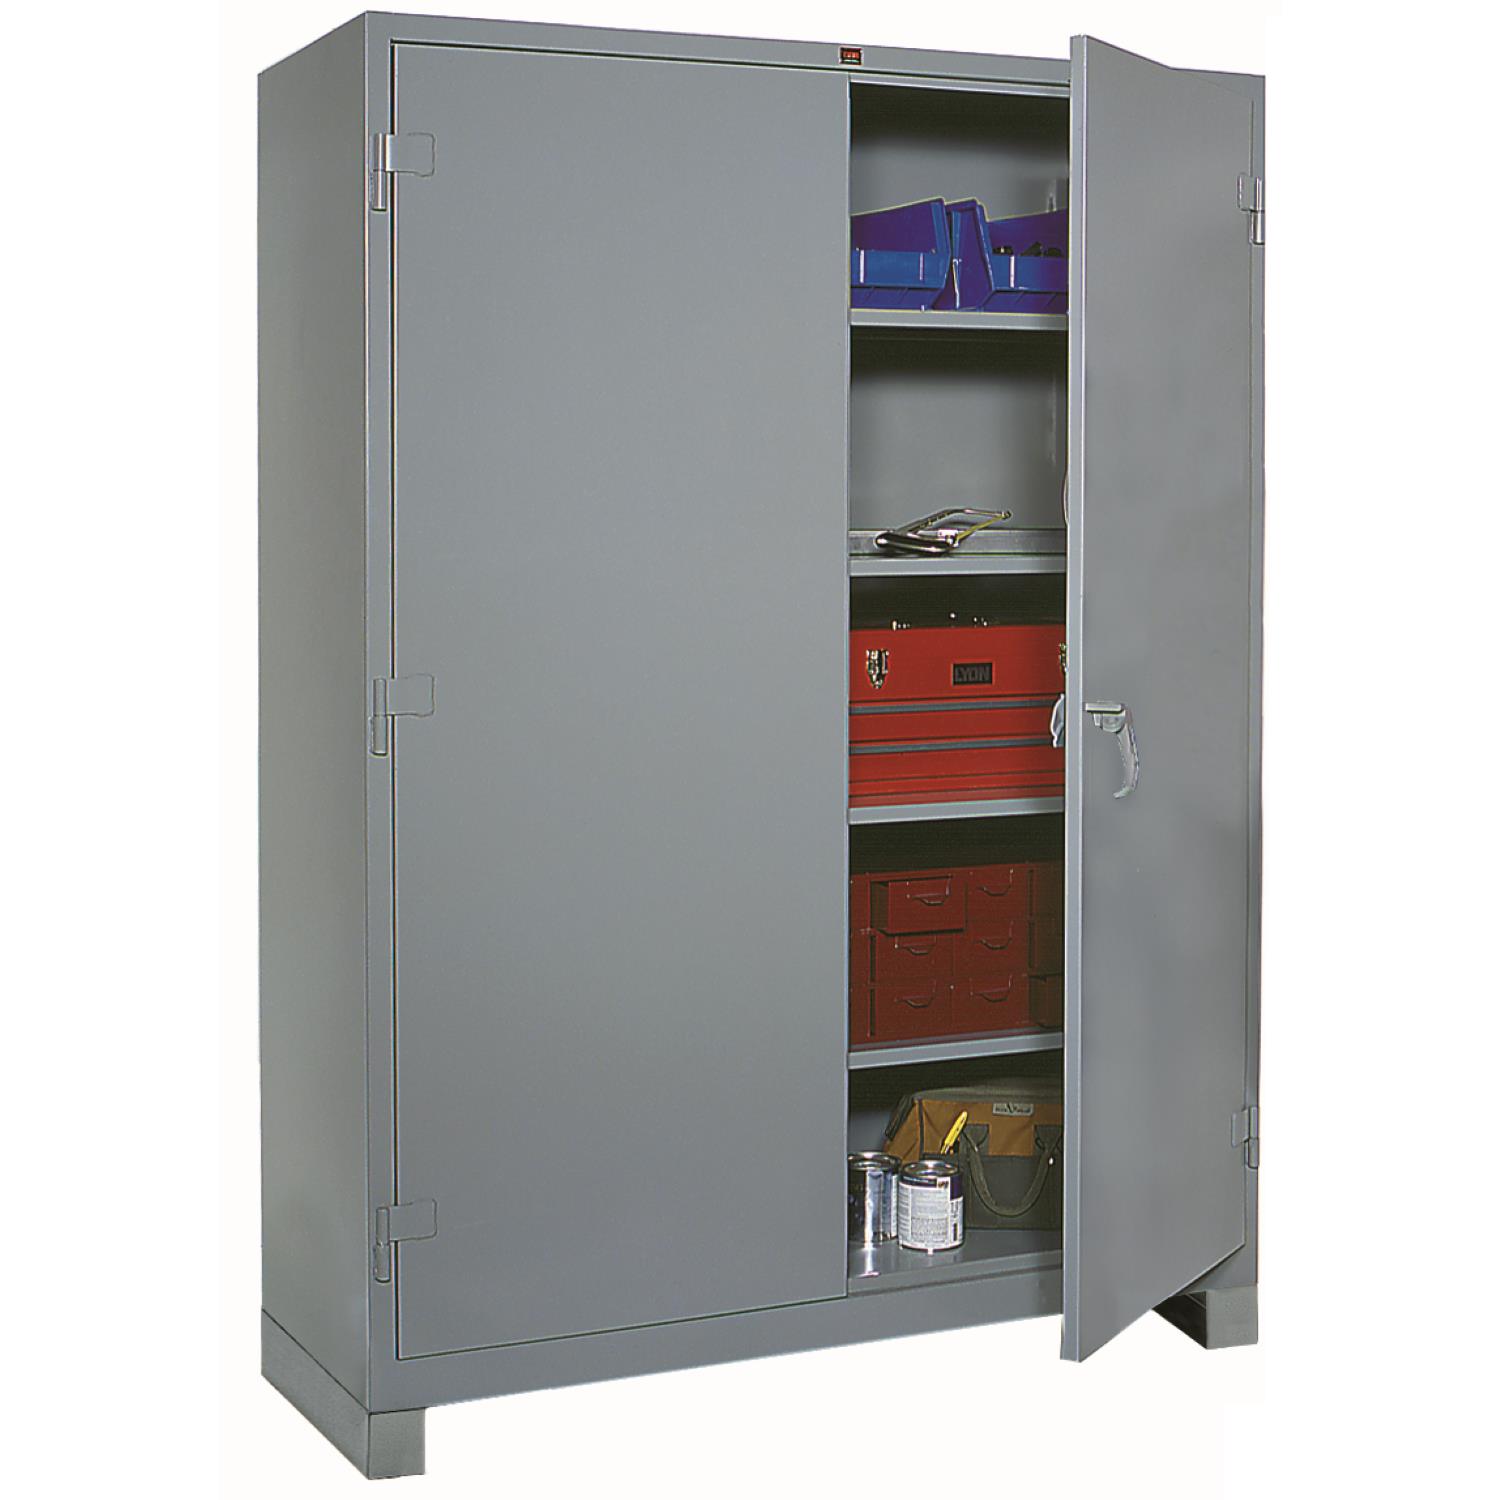 https://www.lyonworkspace.com/wp-content/uploads/lyon-all-welded-storage-cabinet-1145-dove-gray-with-props.jpg